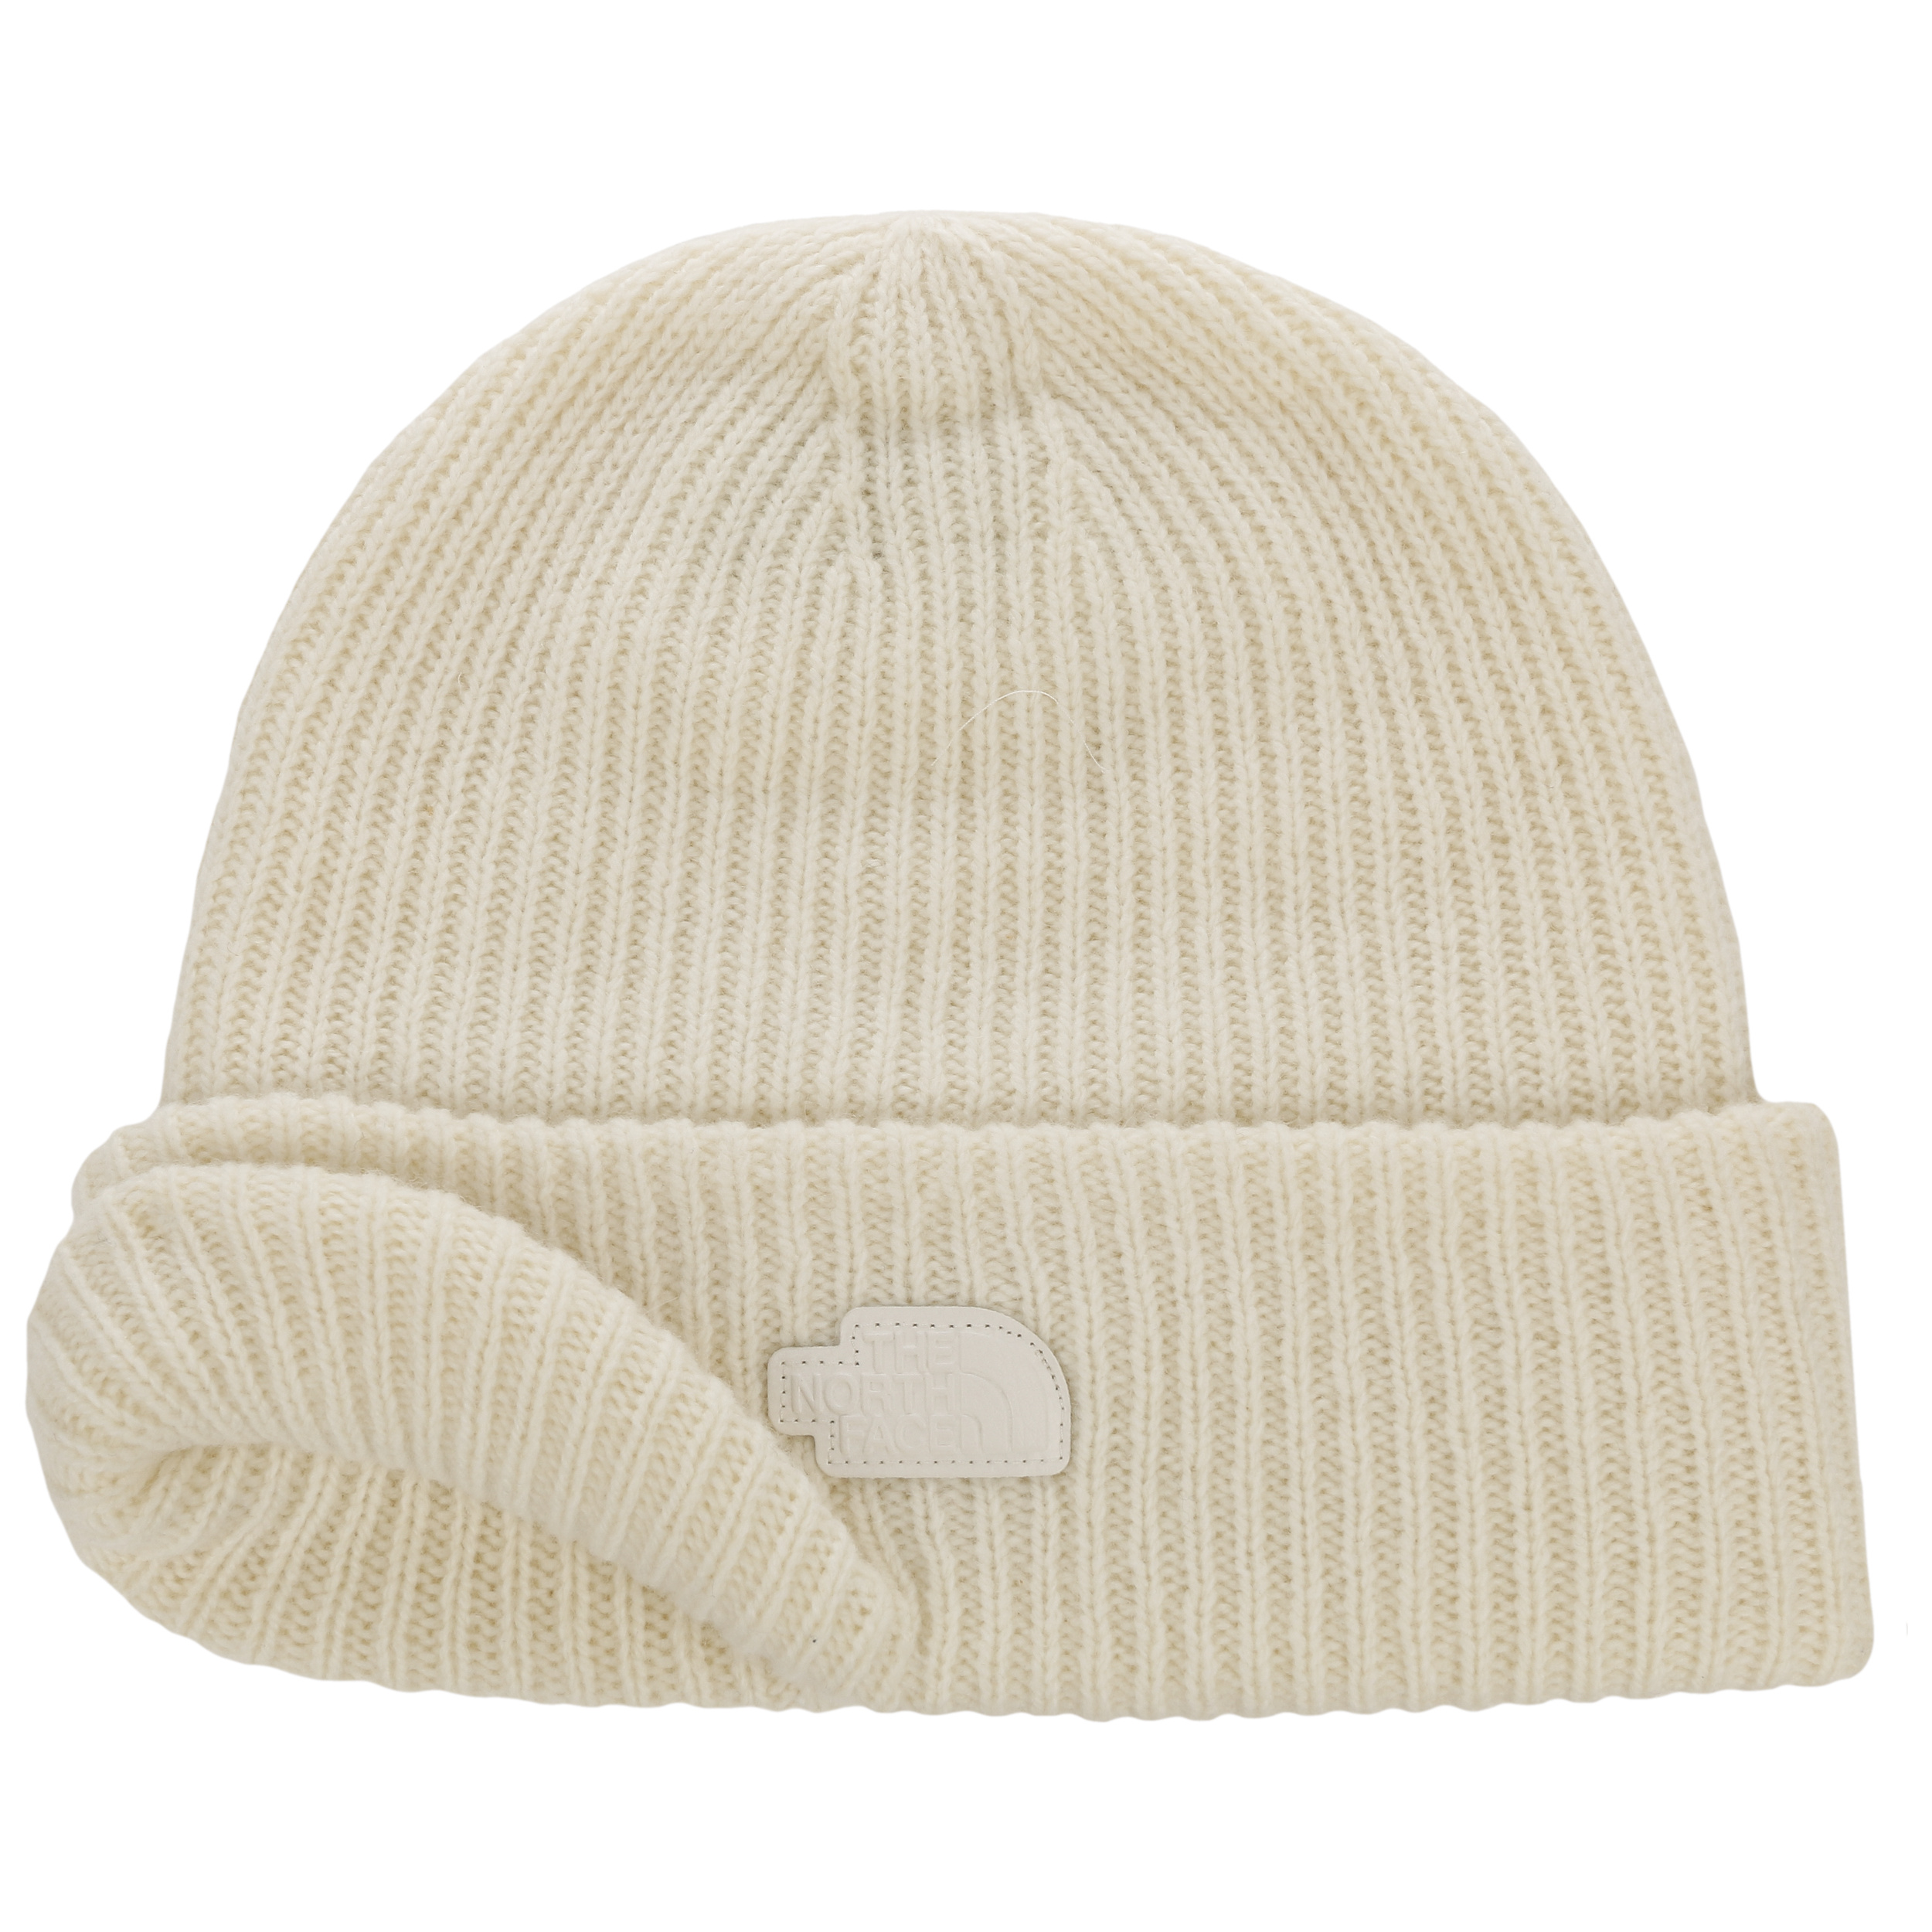 City Street Beanie Hat by The North Face - 58,95